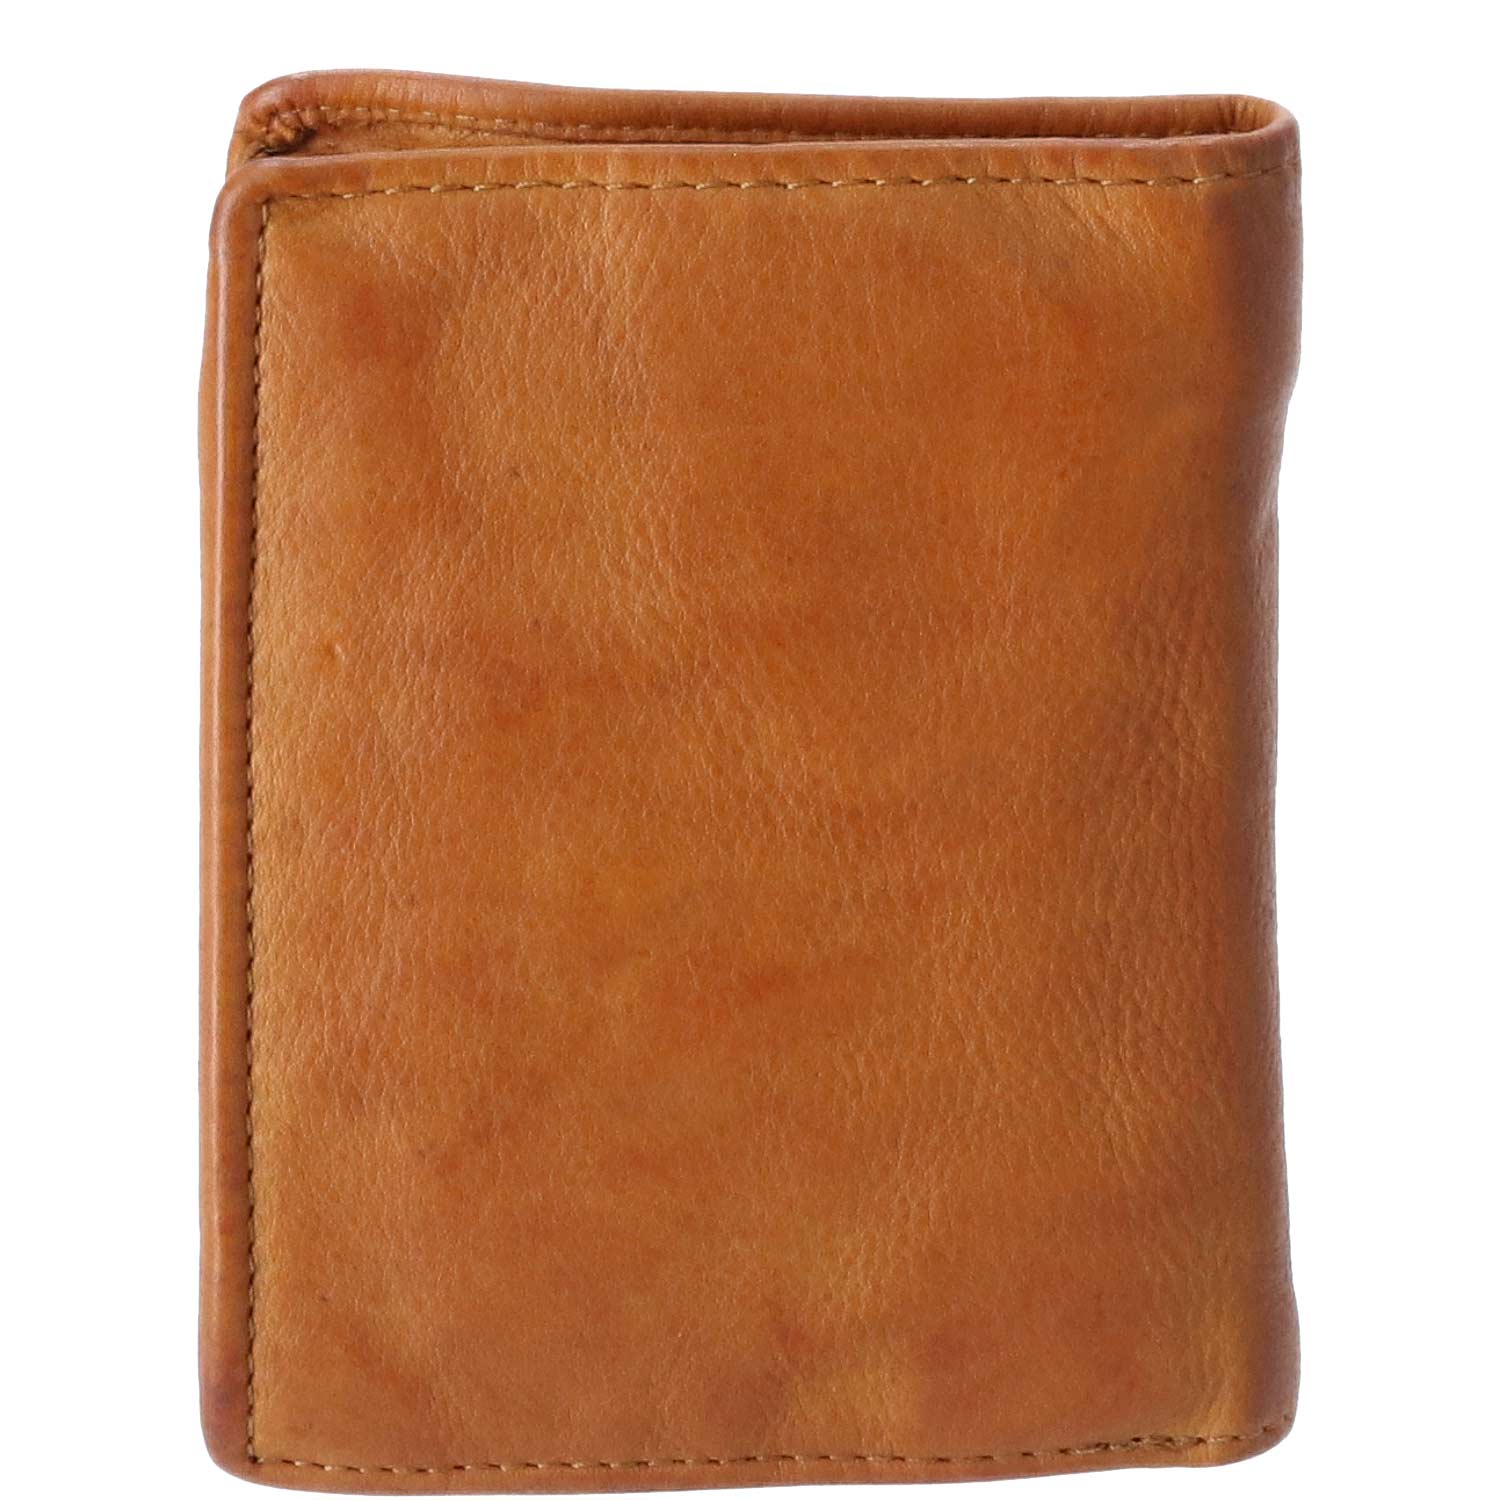 The Skandinavian Brand Mens Wallet Washed Laether Cognac